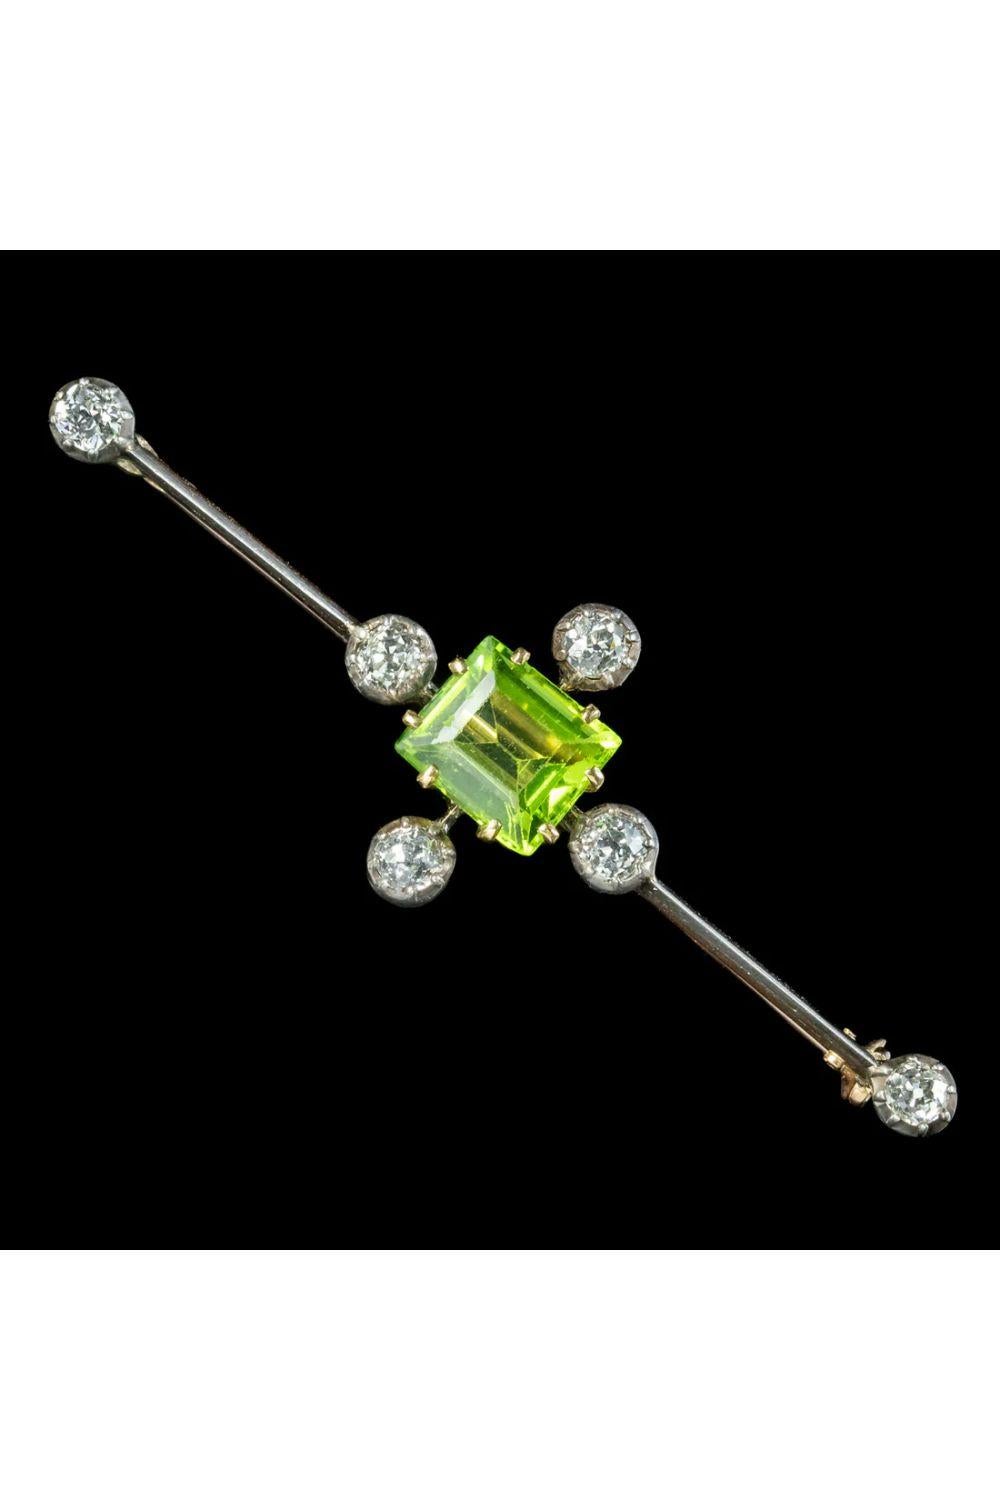 A fancy antique Edwardian bar brooch boasting a bright, green step cut peridot in the centre weighing approx. 3.5ct. It’s surrounded by four sparkling old European cut diamonds and an additional one on each end of the bar. They weigh approx. 0.20ct